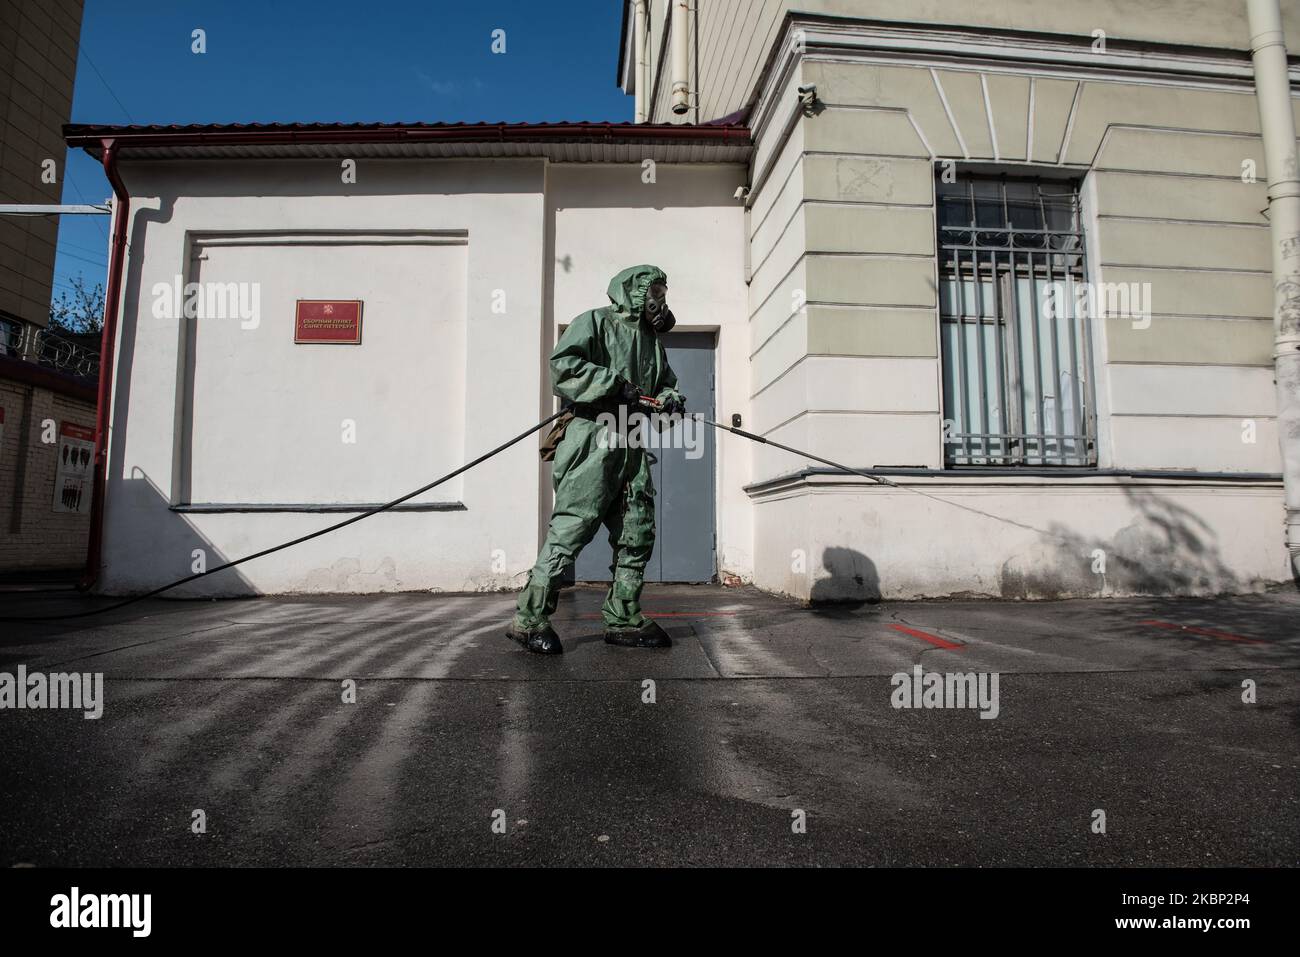 A Russian serviceman sprays disinfectant at the yard of the recruitment center, St. Petersburg, on May 20, 2020. President Vladimir Putin declared a send to the army of 135,000 people during the spring call-up in Russia which started on the 20th of May. All recruits tested for Covid-19 infection, will be quarantined for 14 days in their military units. (Photo by Sergey Nikolaev/NurPhoto) Stock Photo